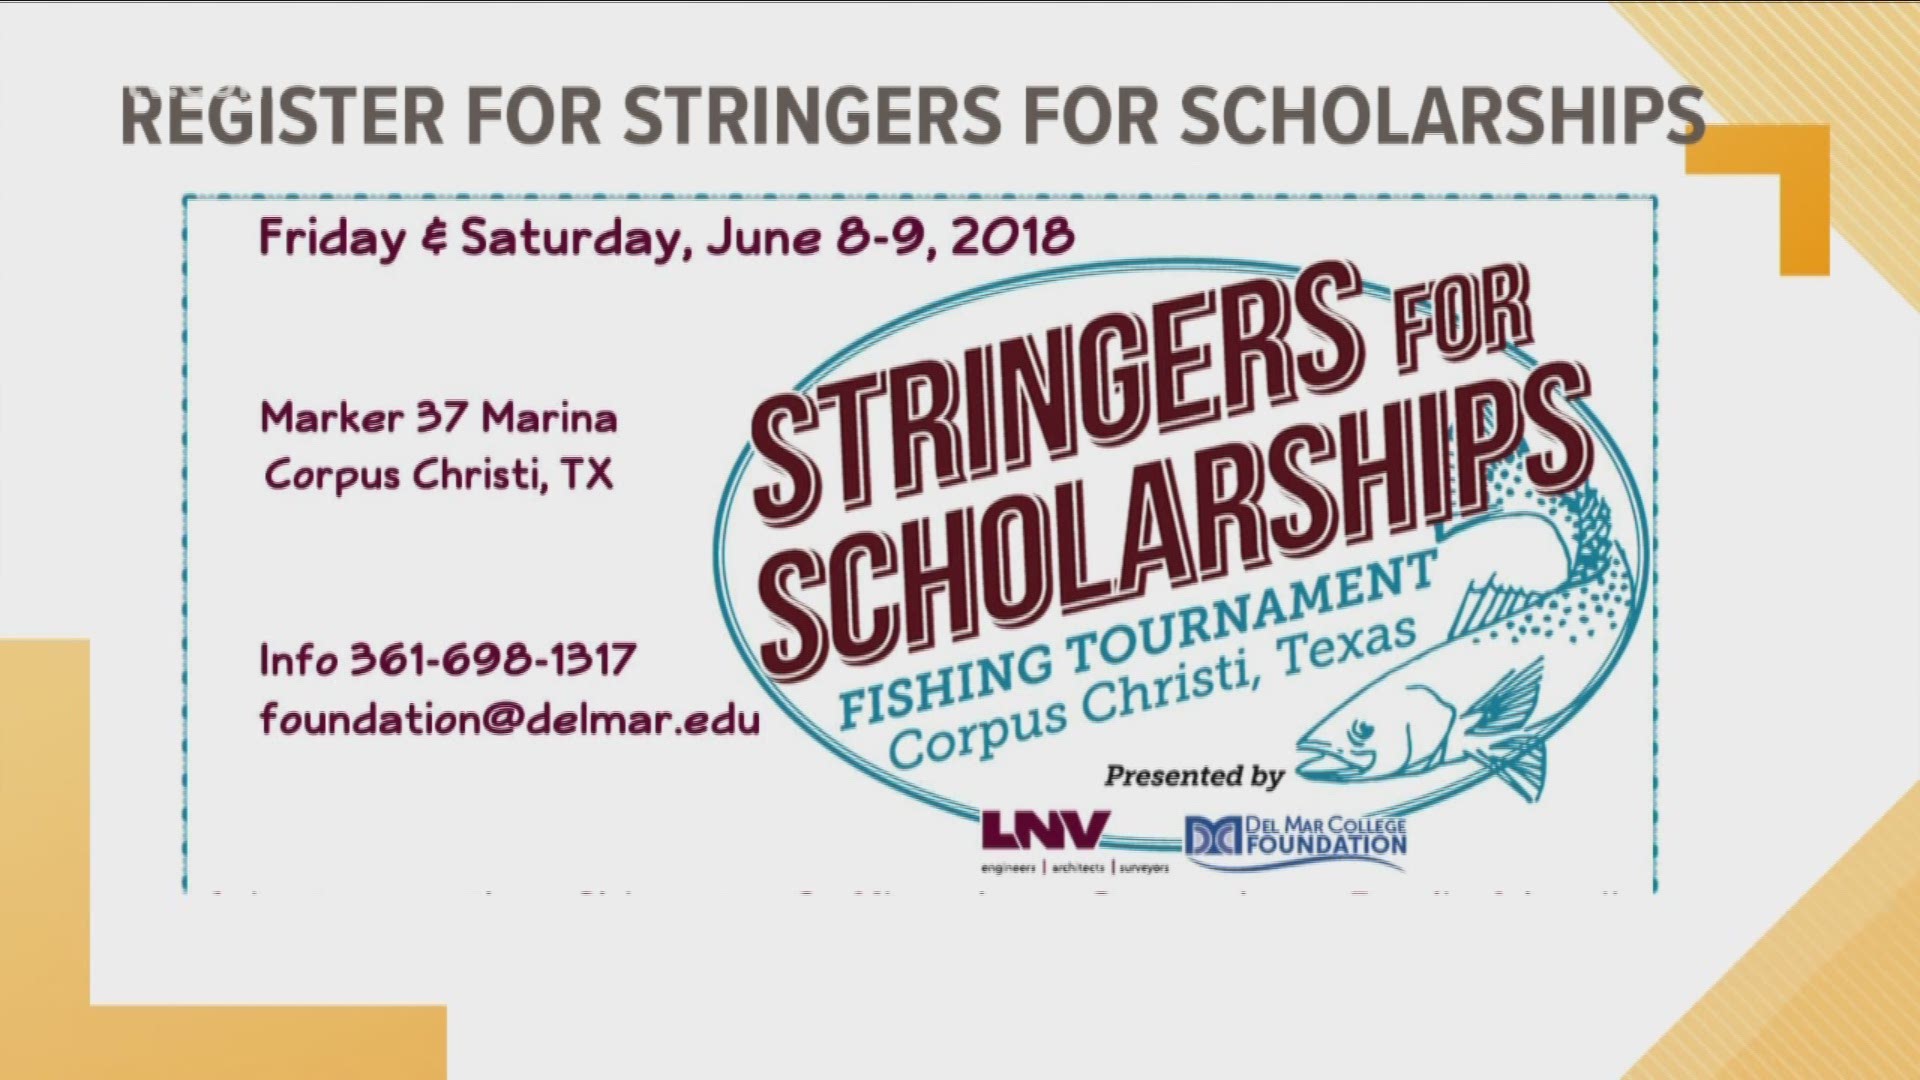 The fifth annual event brings anglers together for a good cause. 